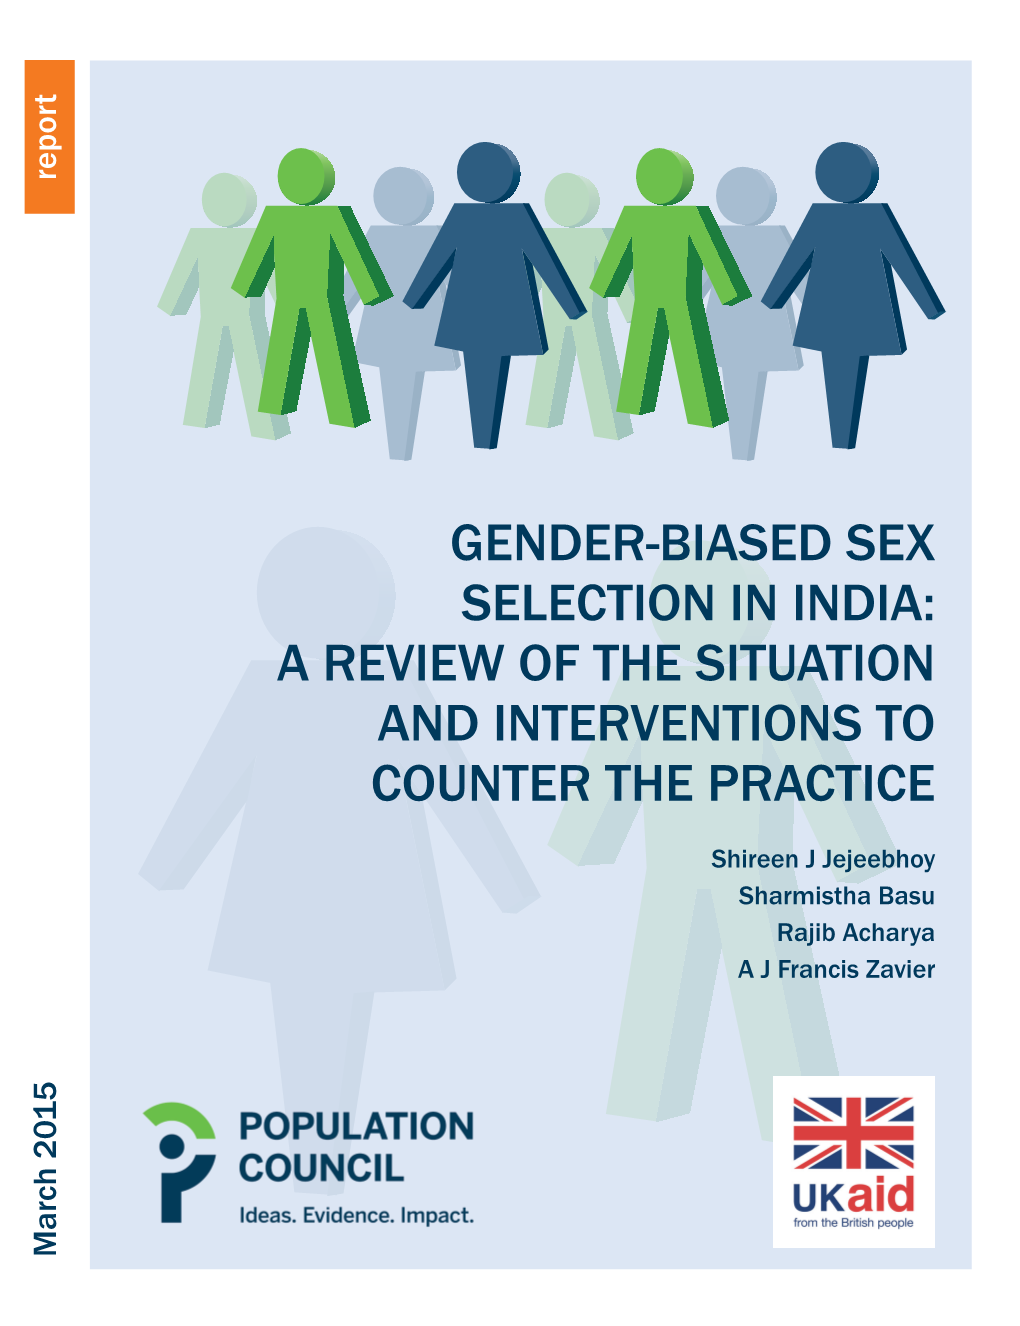 Gender-Biased Sex Selection in India: a Review of the Situation and Interventions to Counter the Practice